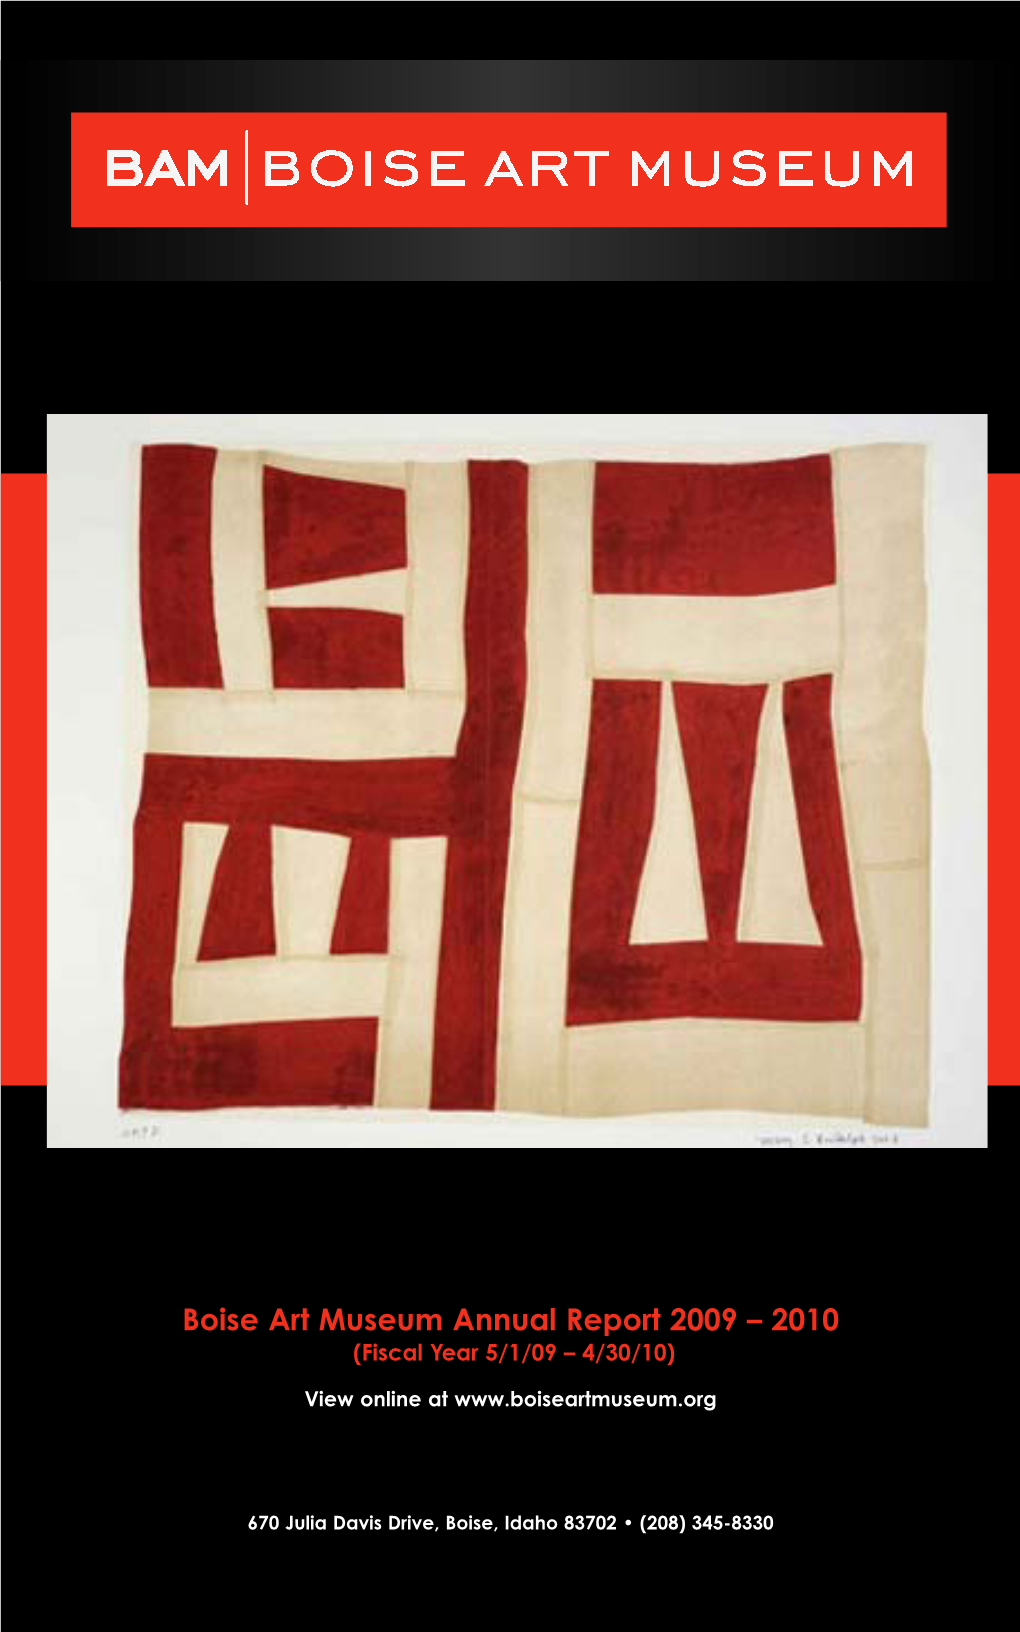 Boise Art Museum Annual Report 2009 – 2010 (Fiscal Year 5/1/09 – 4/30/10)